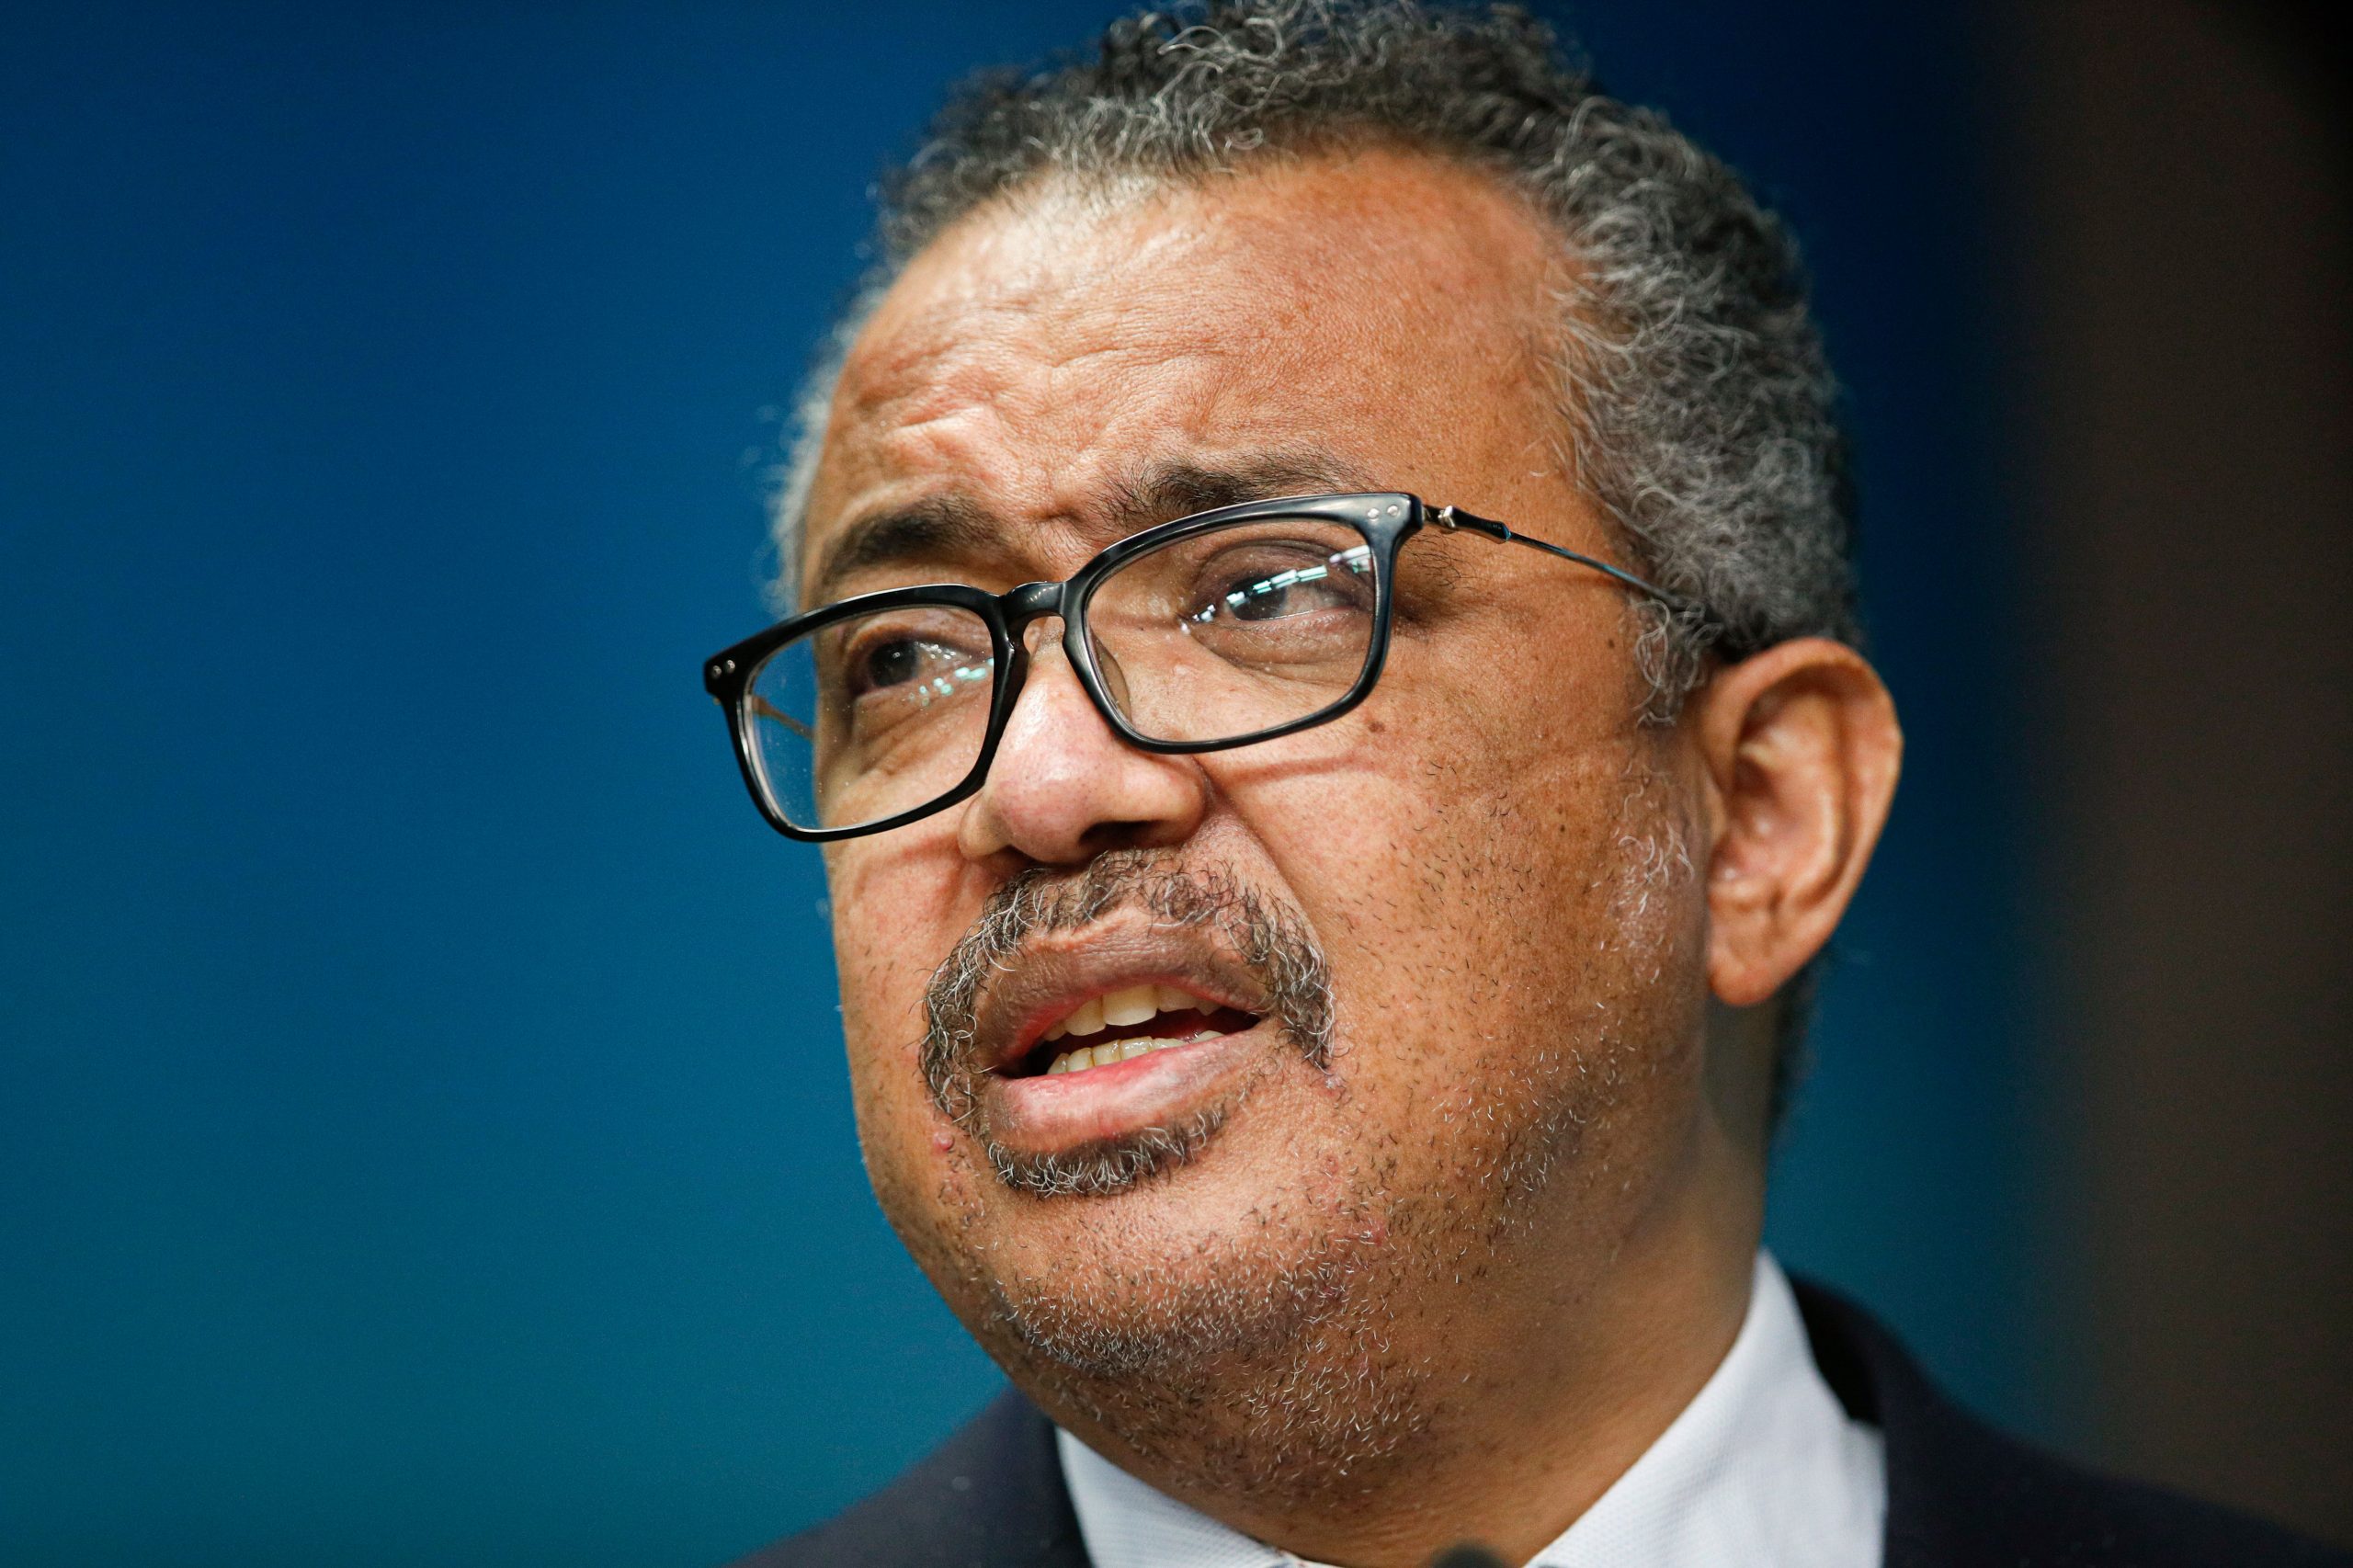 Tedros re-elected as World Health Organization Director-General